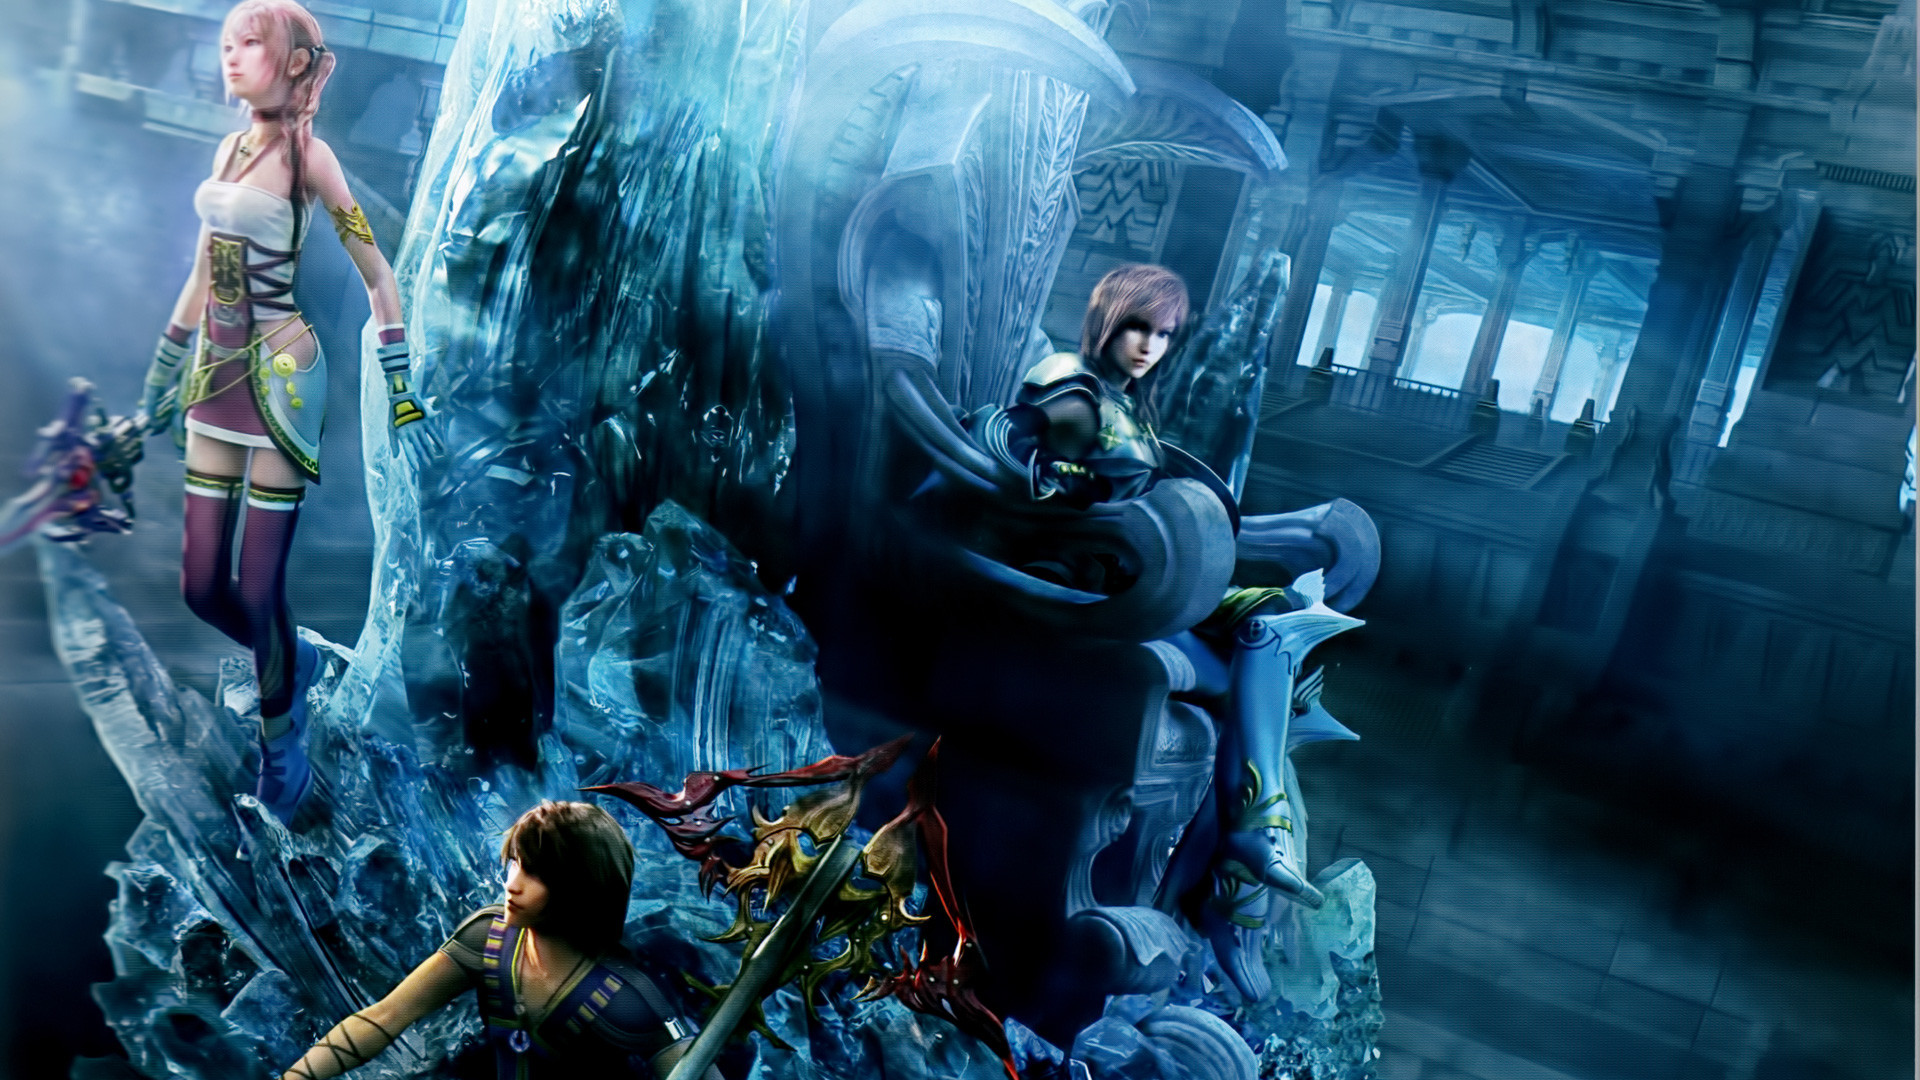 1920x1080 final fantasy xiii wallpapers is high definition wallpaper you can